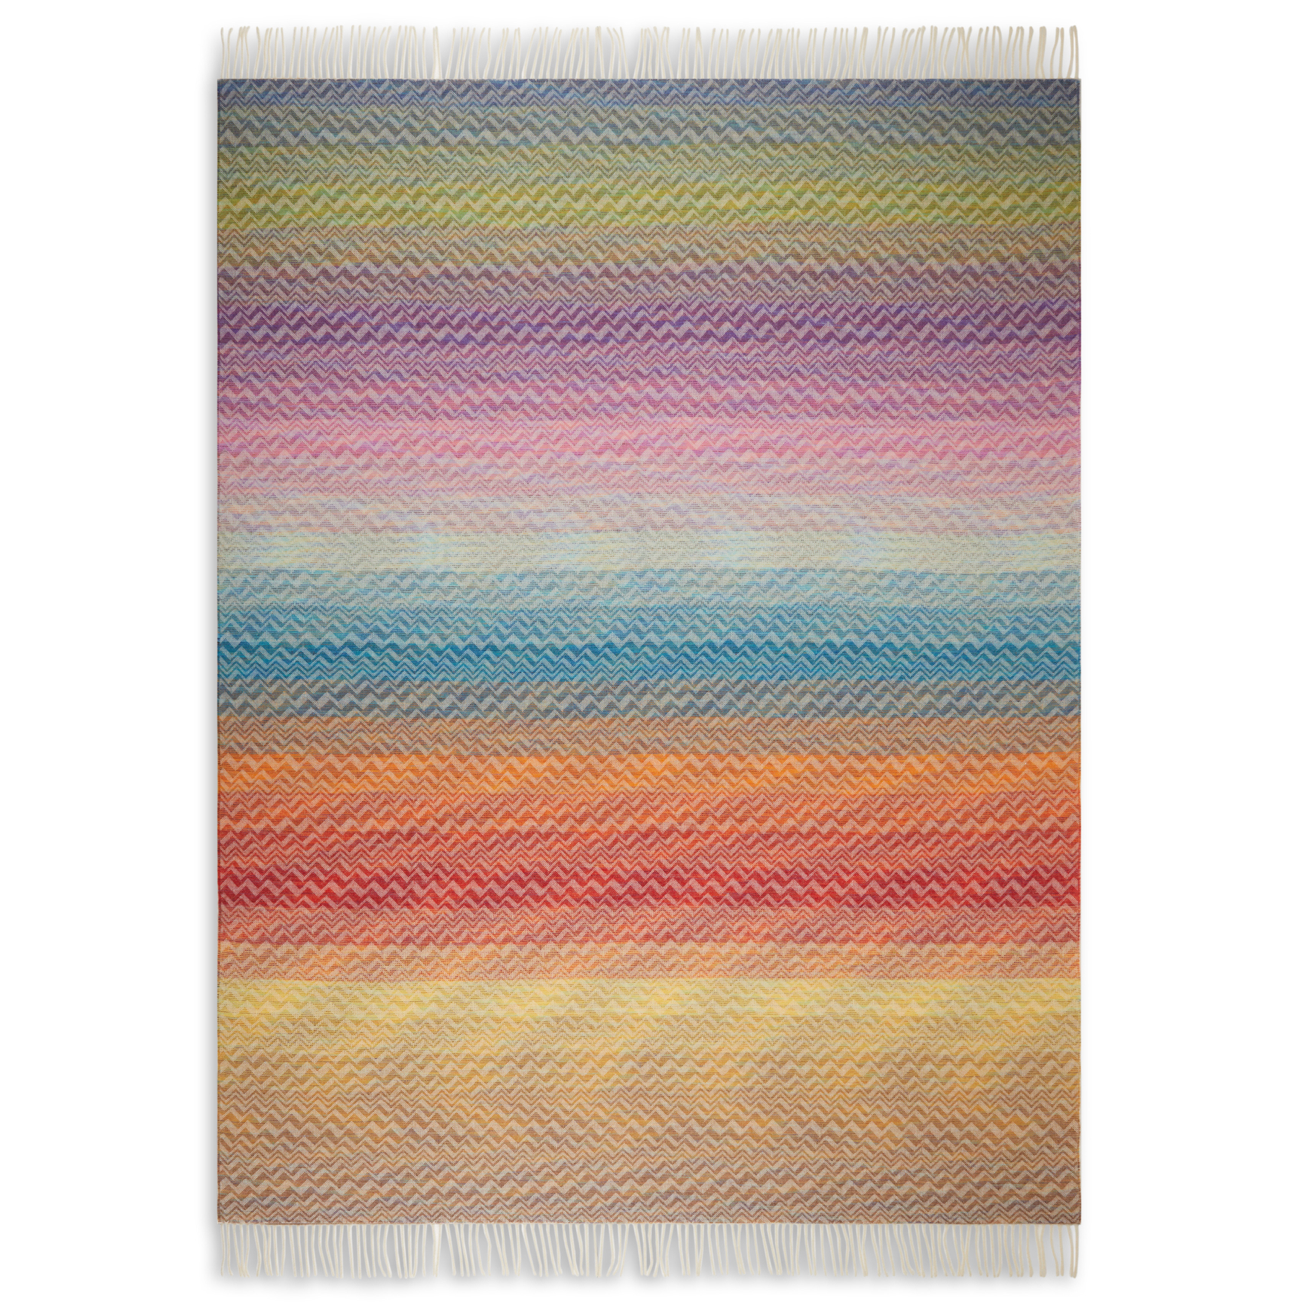 Bastien 100 wool throw by Missoni Home